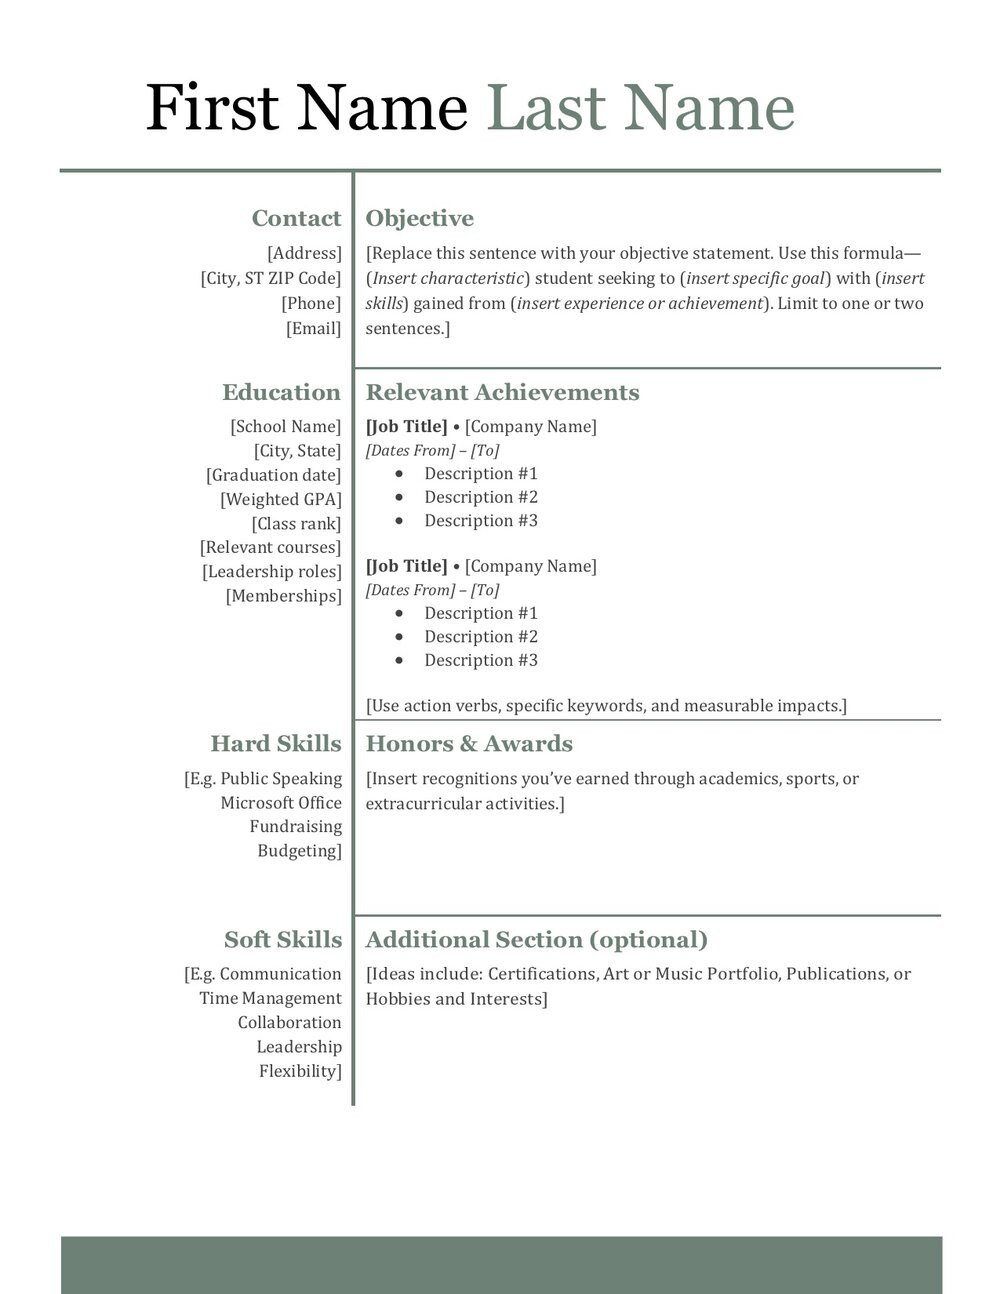 Sample Resume Education Section High School How to Write An Impressive High School Resume â Shemmassian …